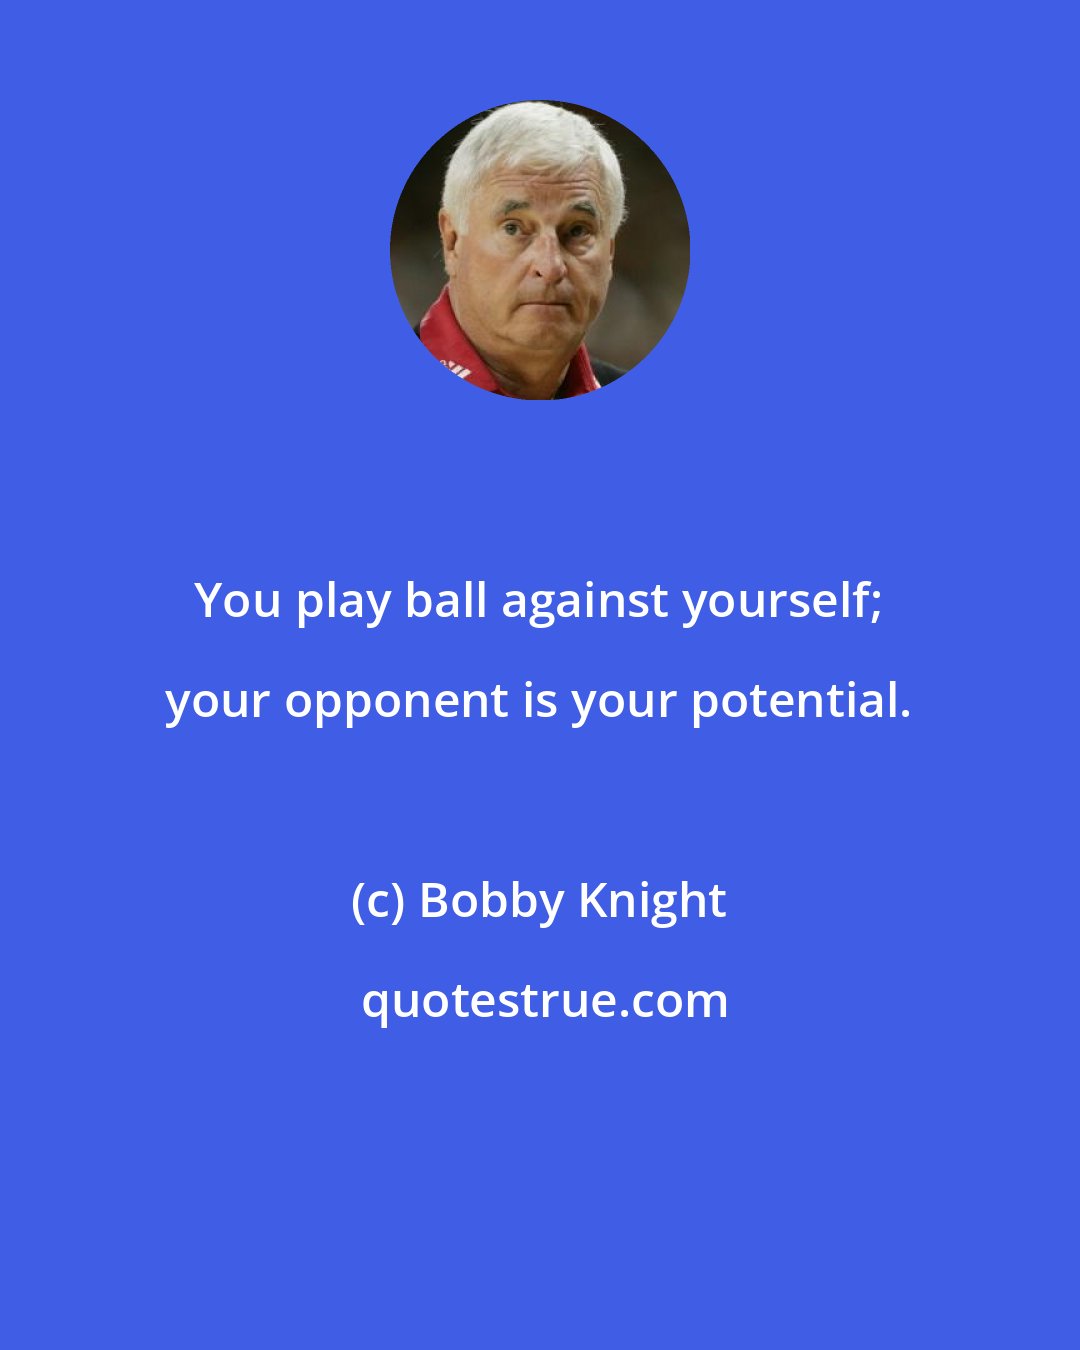 Bobby Knight: You play ball against yourself; your opponent is your potential.